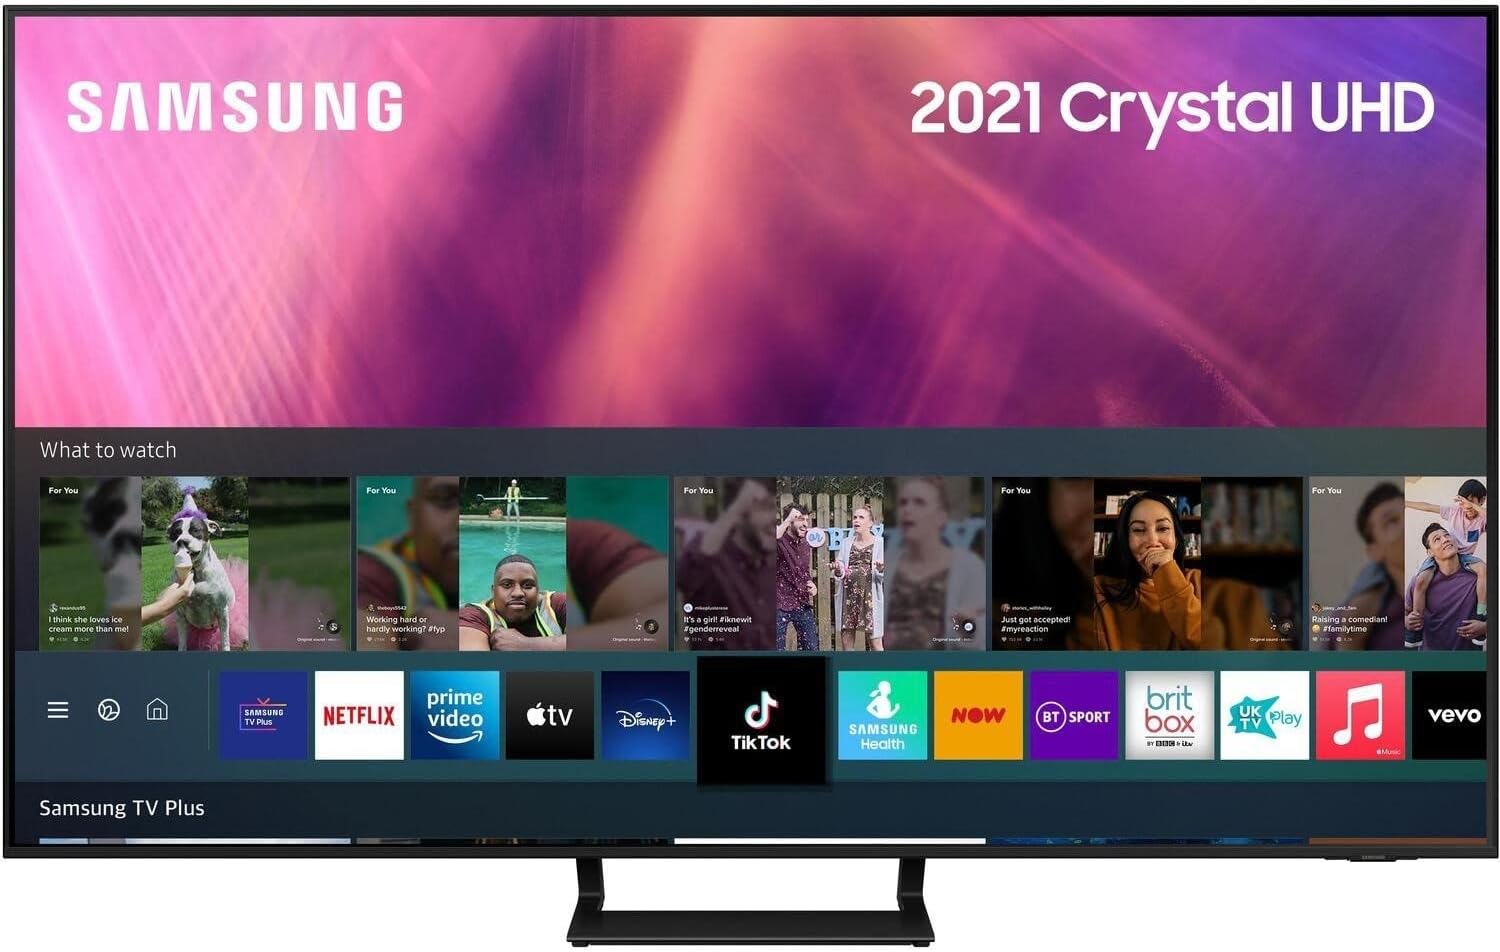 Samsung 50 Inch CU8500 4K UHD Smart TV (2023) - Air Slim Design TV With Centre Stand & Alexa Built In, 4K Crystal Processor, Object Tracking Sound, Multi View, Gaming TV Hub & Smart TV Content - Amazing Gadgets Outlet